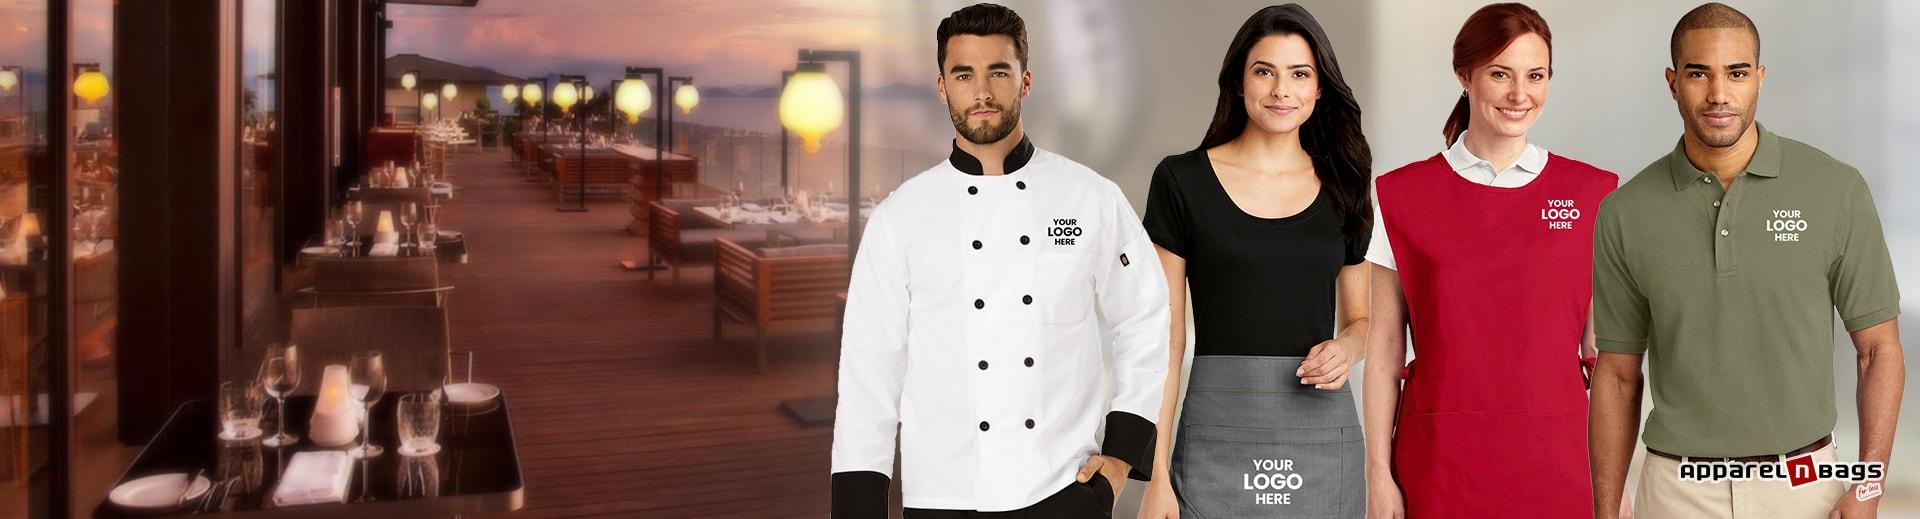 Why Quality Restaurant Uniforms Are Important for Your Business